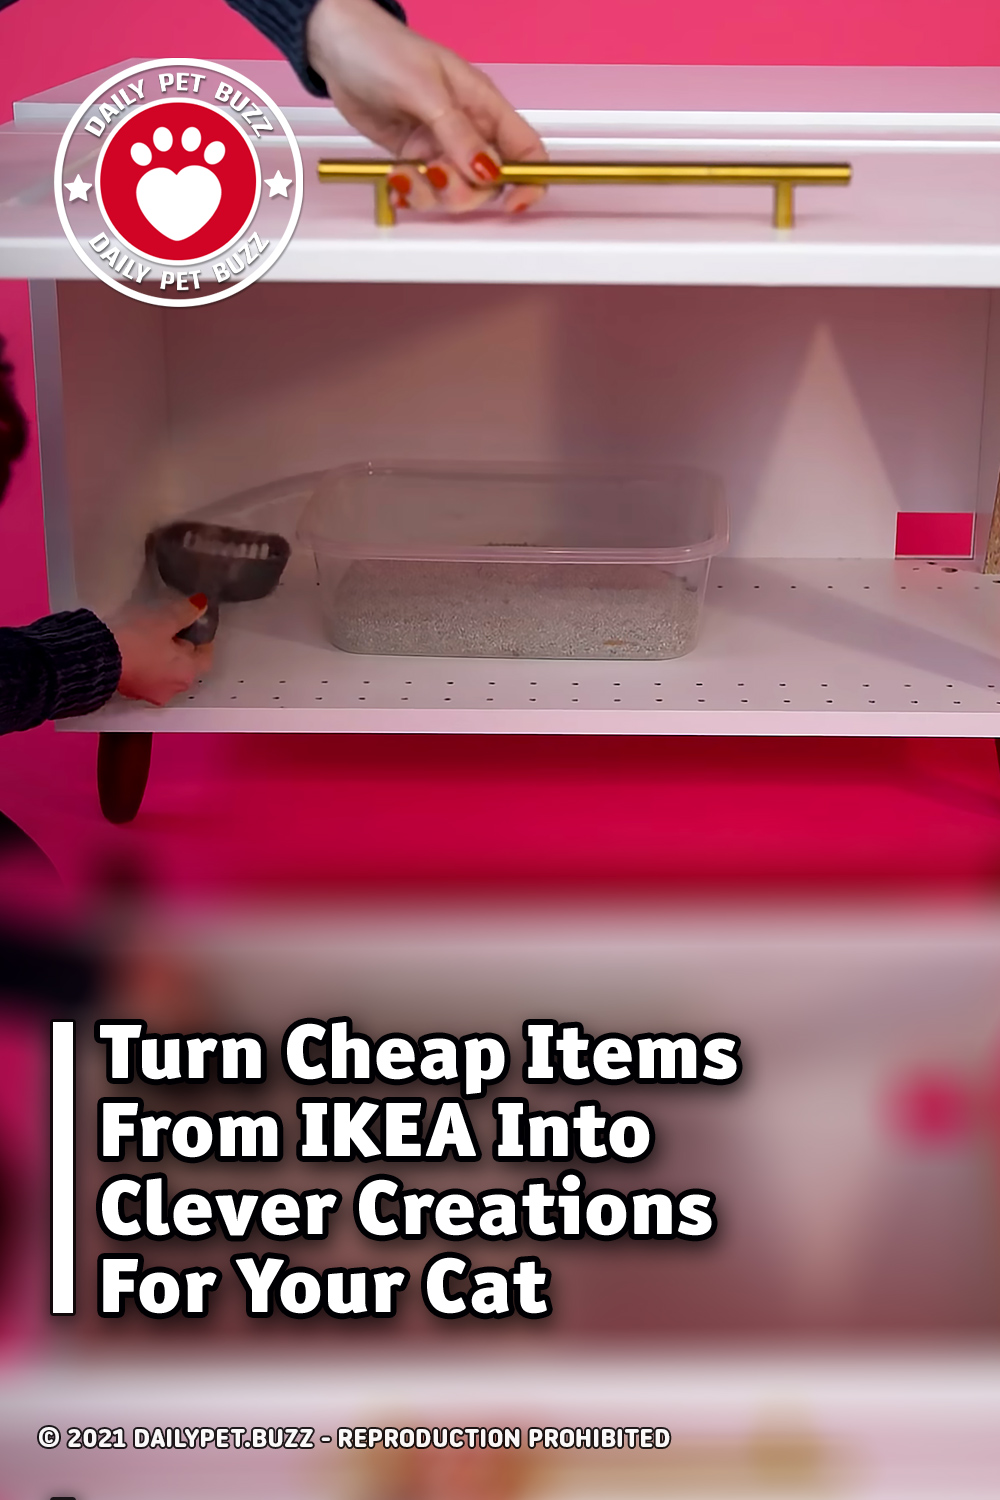 Turn Cheap Items From IKEA Into Clever Creations For Your Cat